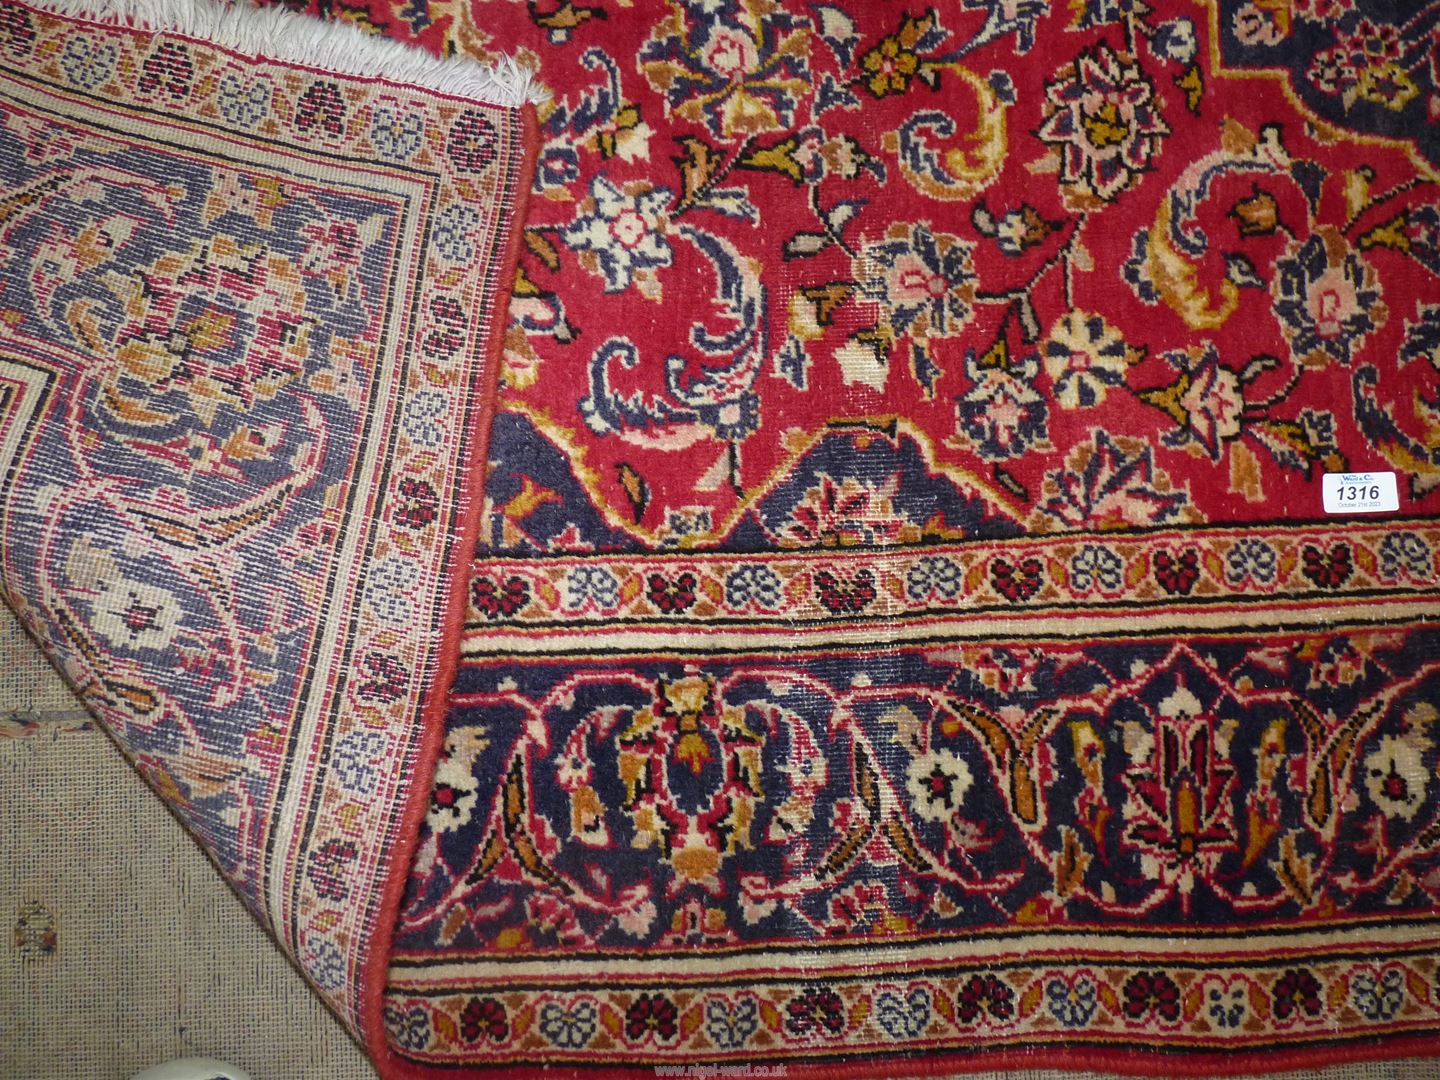 A navy/red/cream and floral patterned rug, 56" x 92". - Image 2 of 2